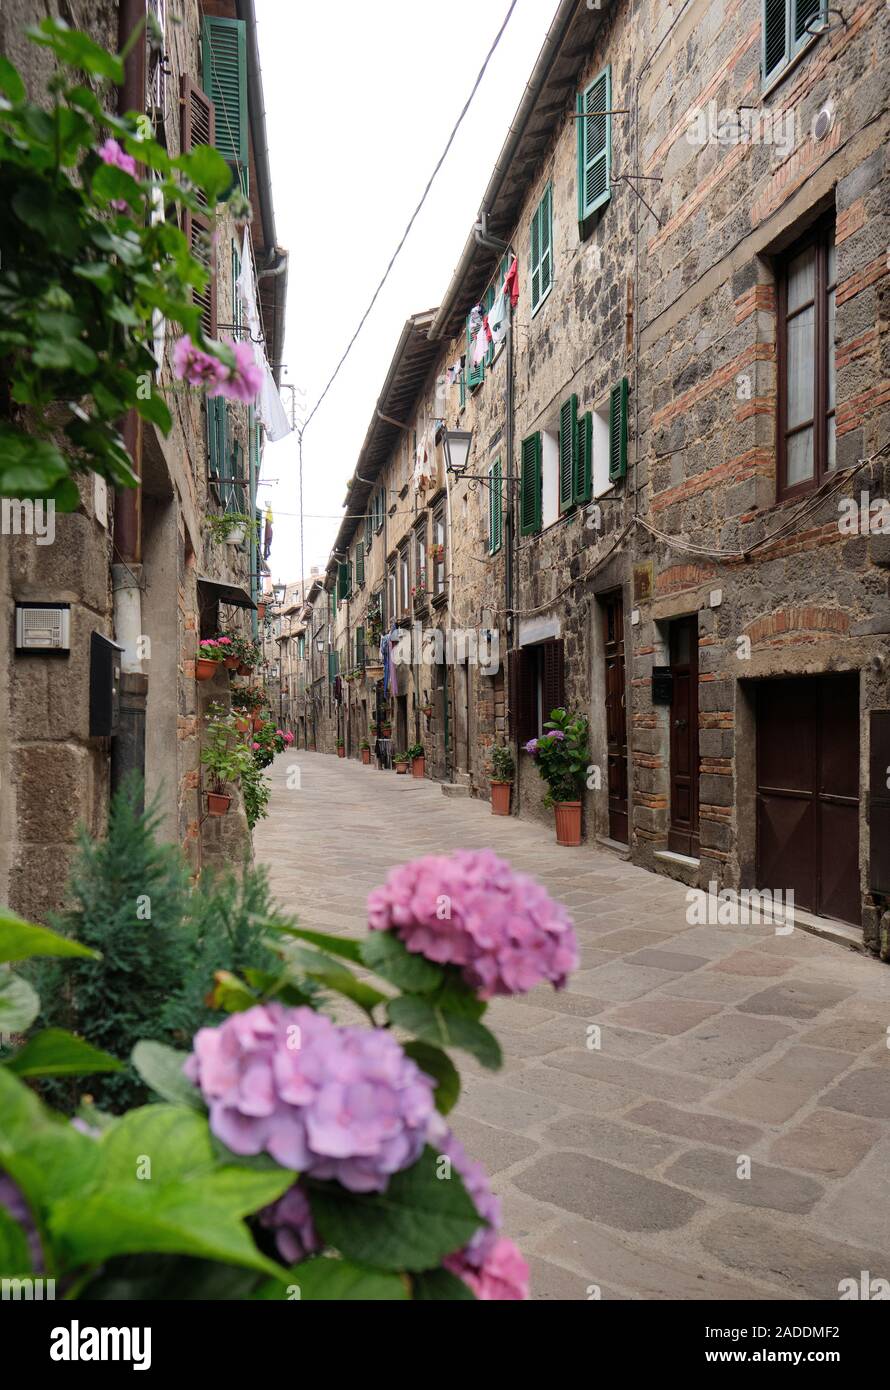 The narrow medieval centre streets and house architecture of Abbadia San Salvatore in Monte Amiata,Tuscany Italy EU Stock Photo